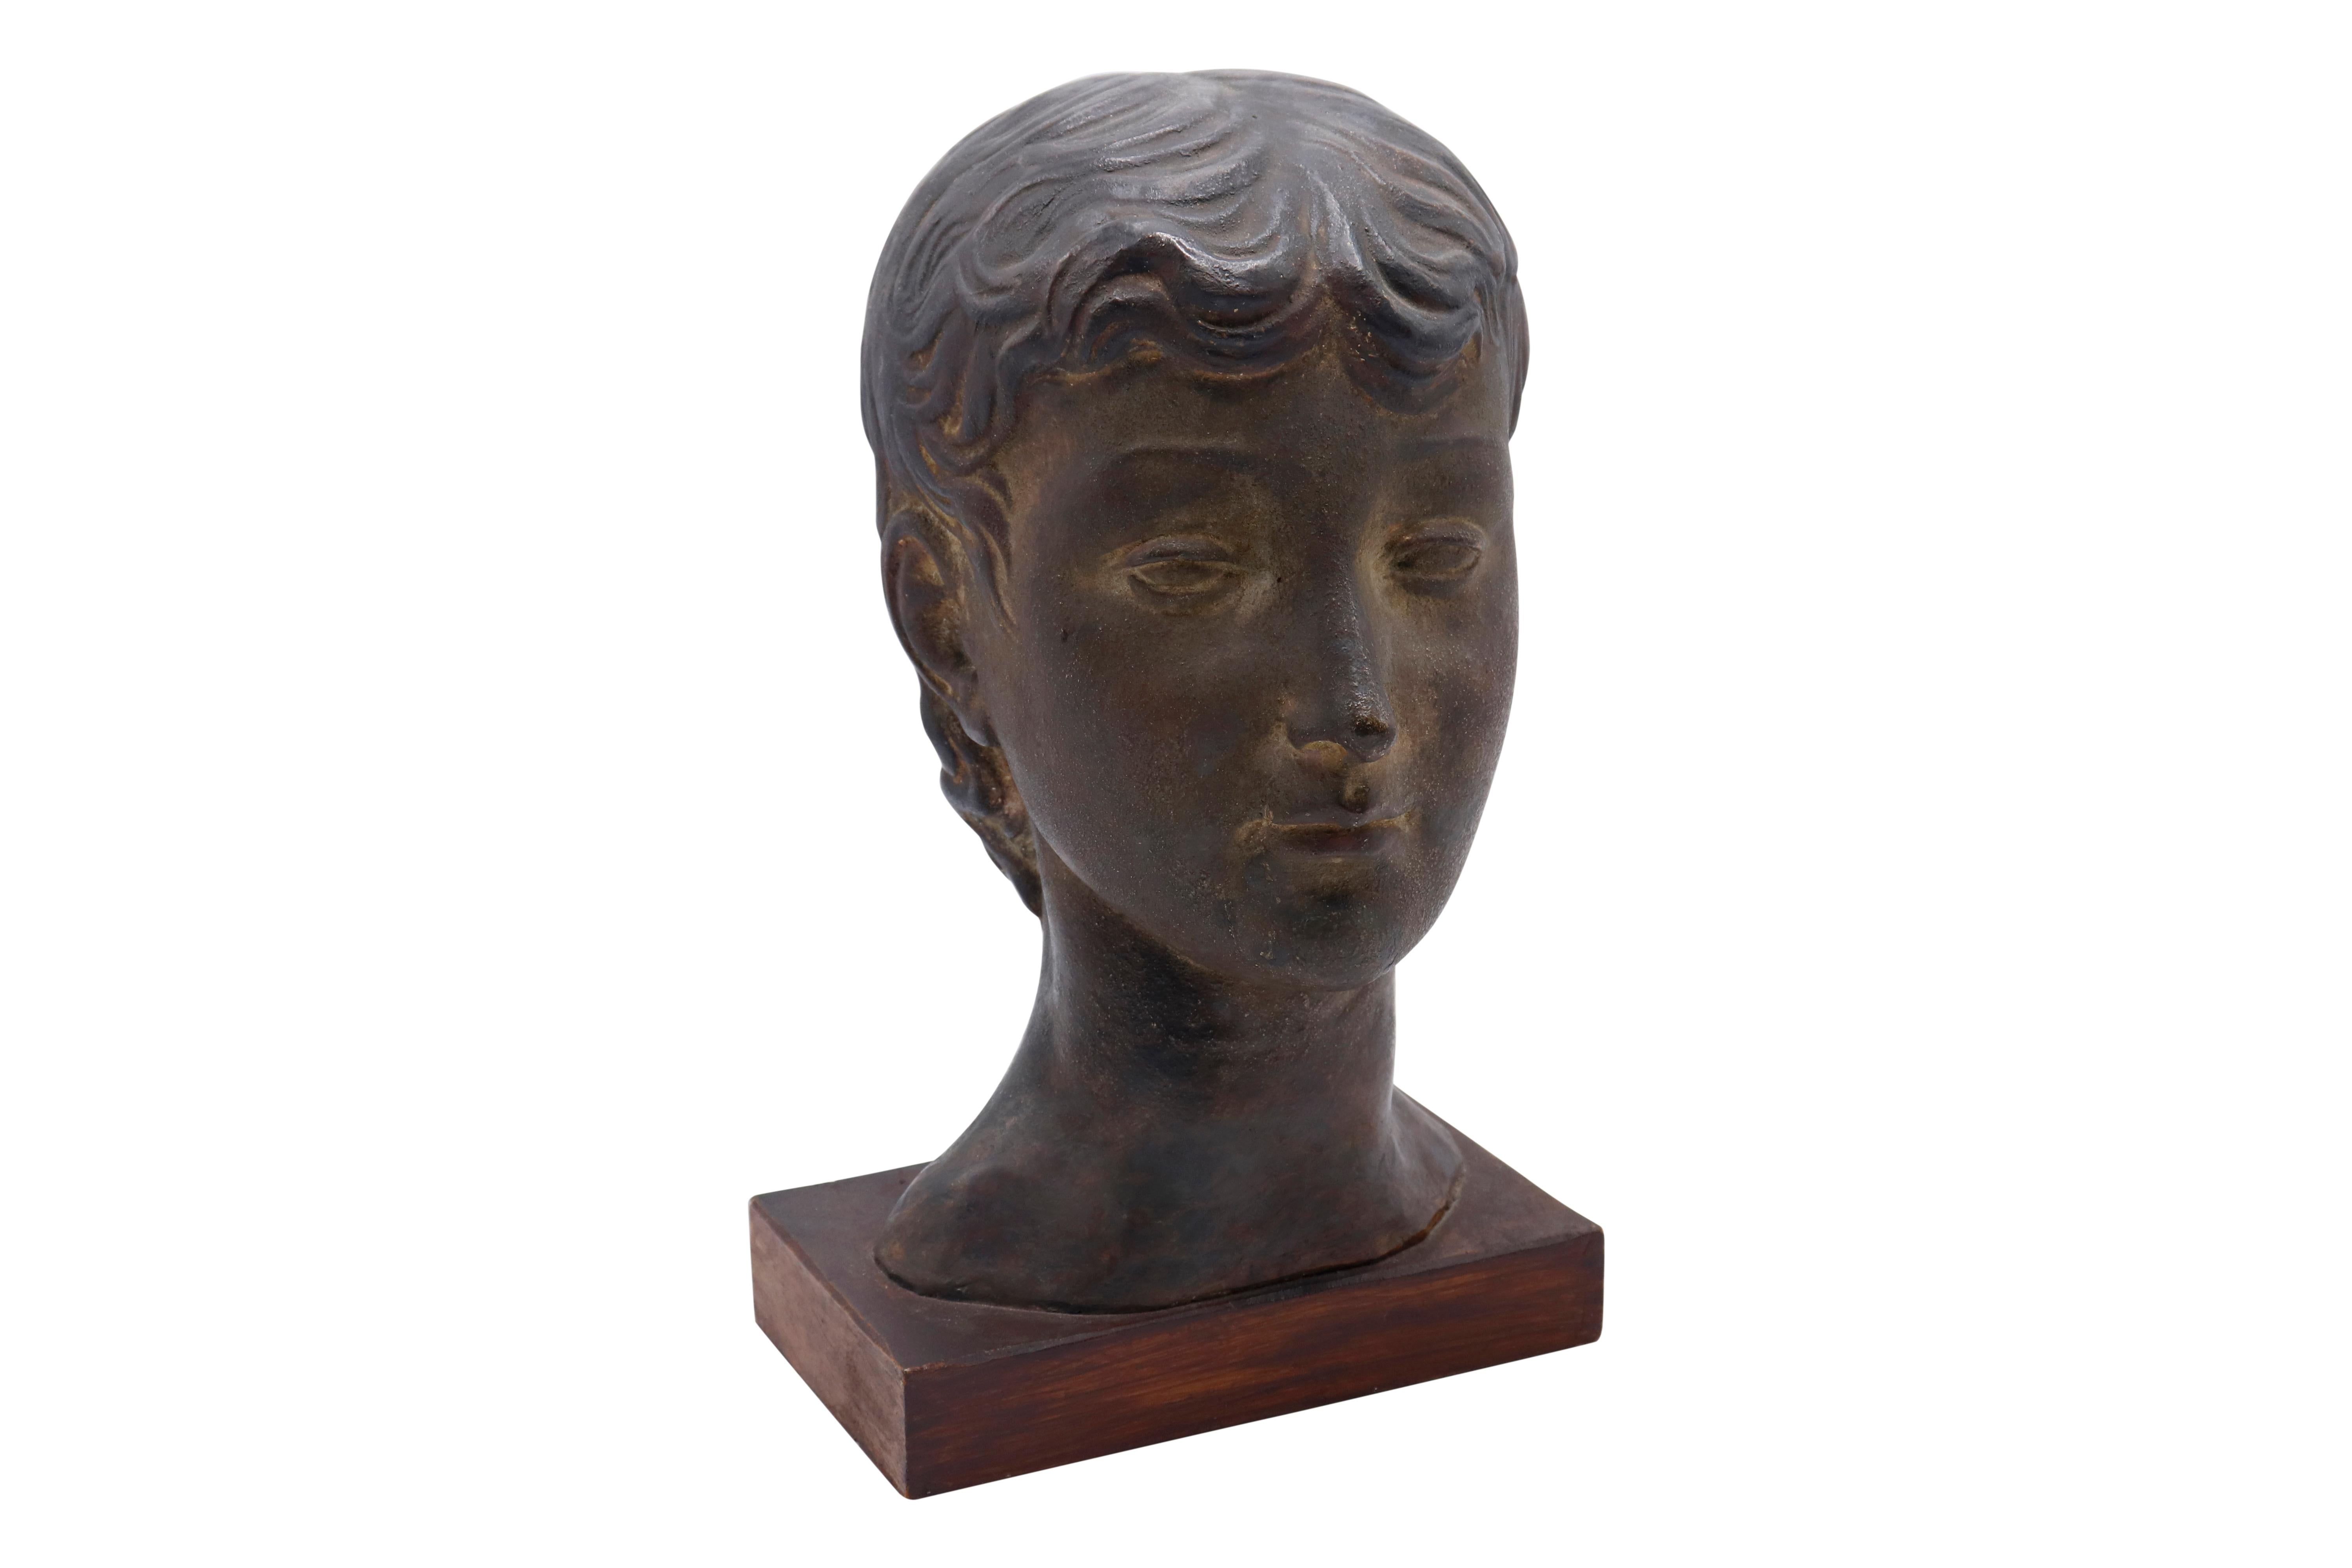 Lovely bust of young women from the 1930s subtle detail in coloring. Mounted on wooden base (a Grecian quality to her hair style).